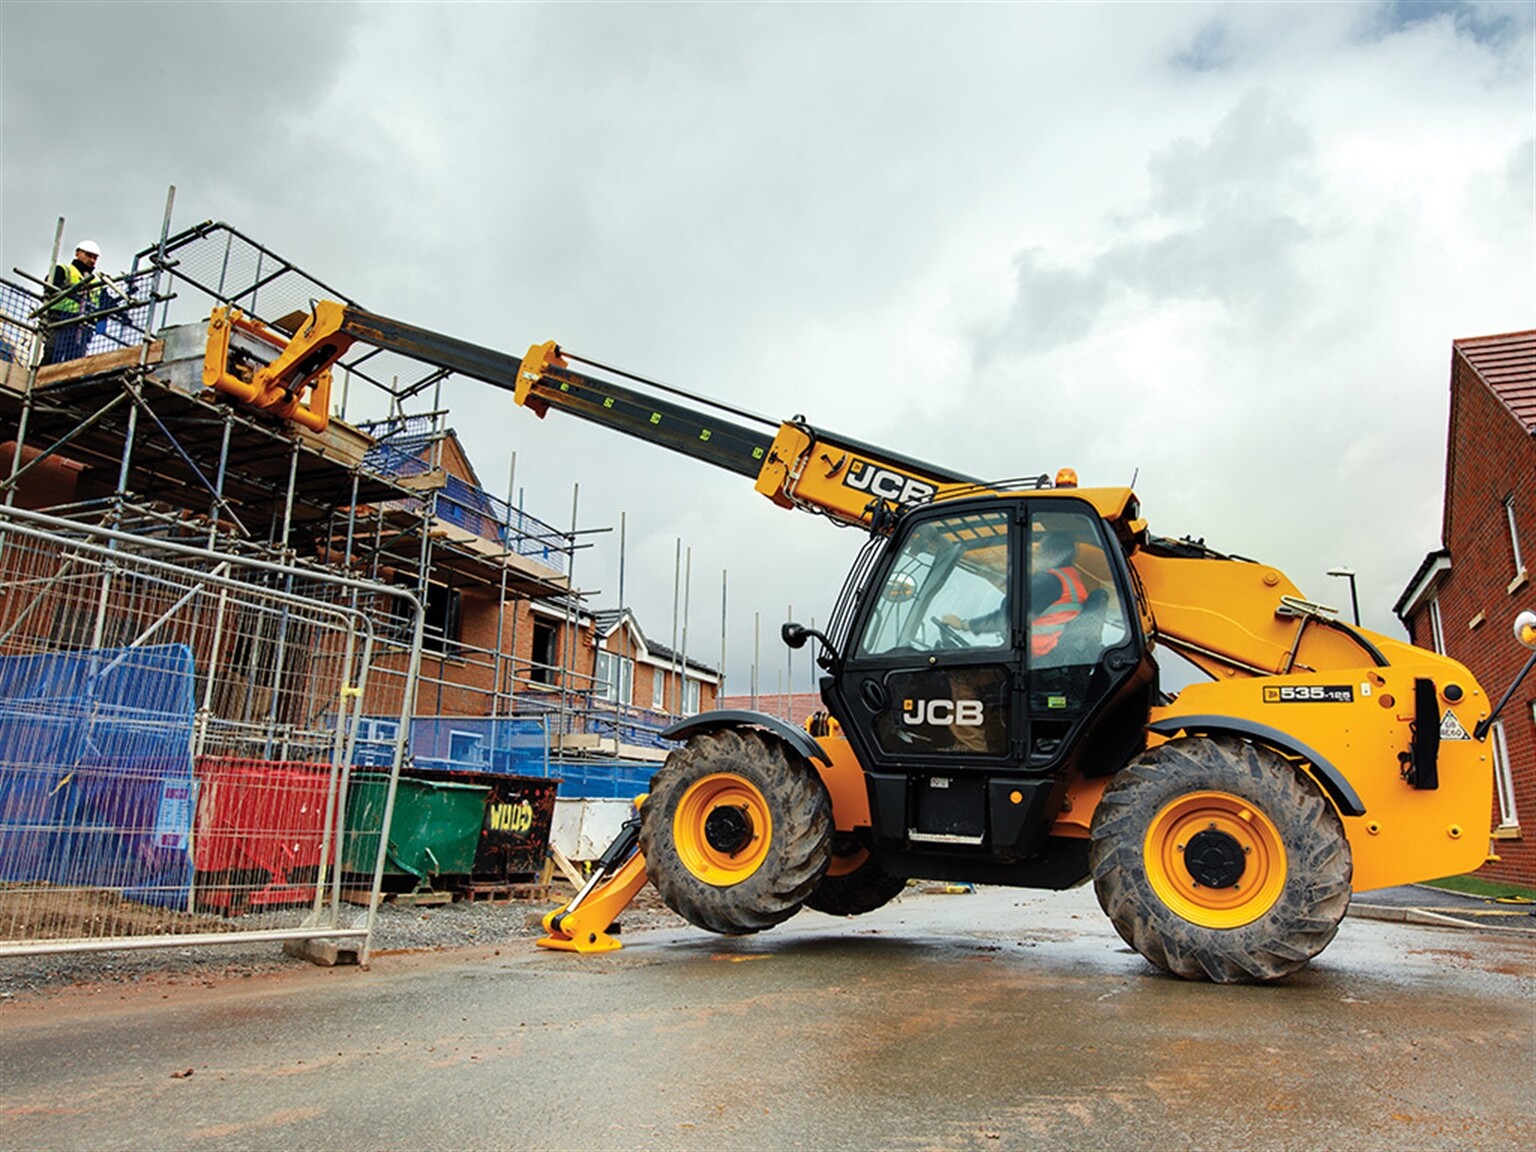 JCB wins court injunction to stop patent infringement